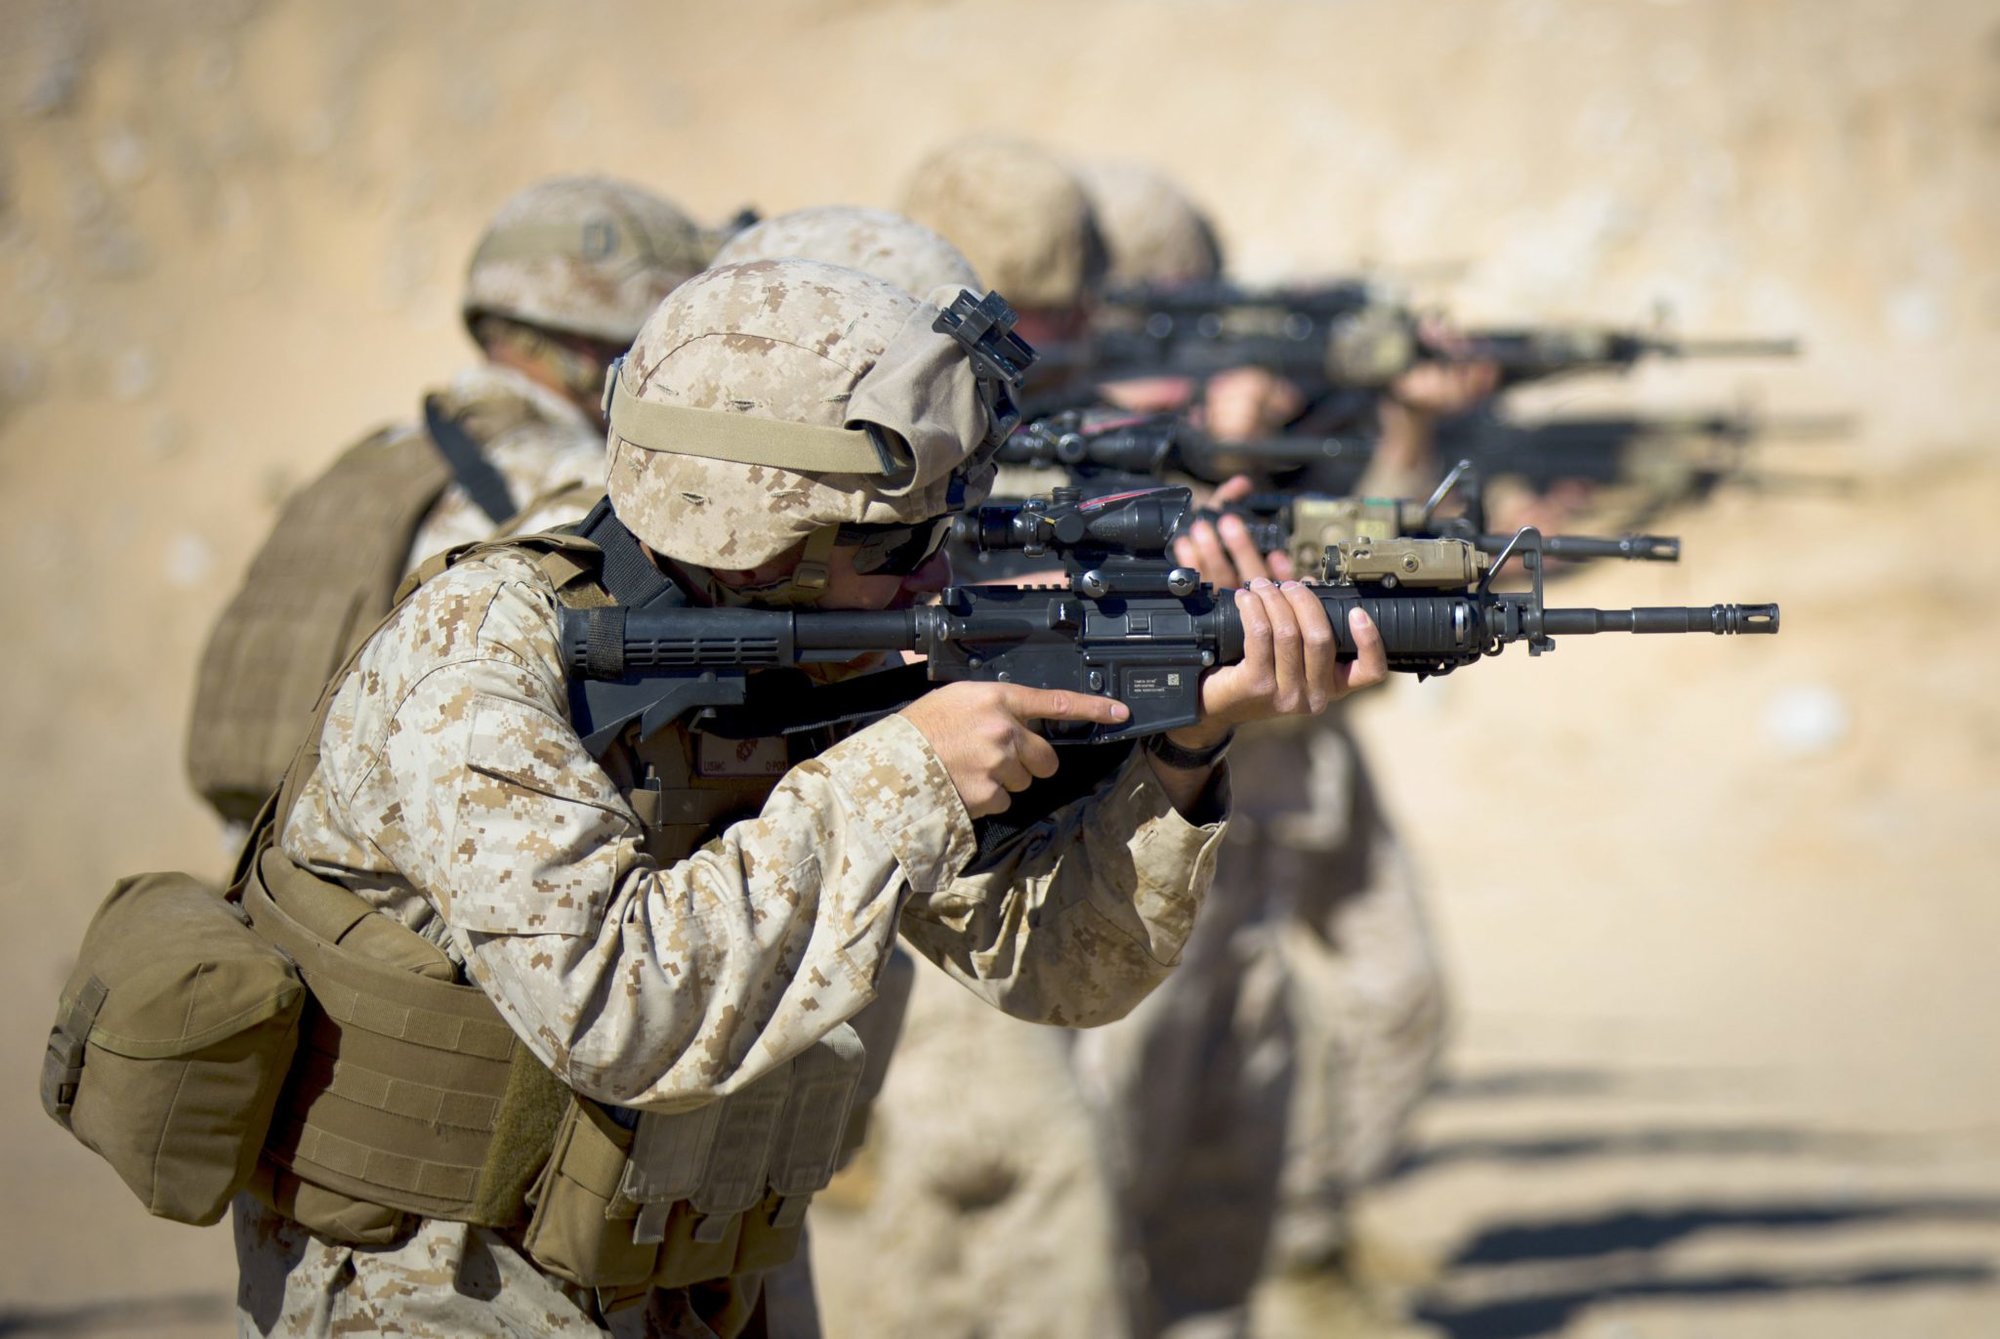 U.S. Marines assigned to Headquarters Company, 4th Marine Regiment, fire down range during the Table 3 course of fire at Range 105-A aboard Camp Wilson, Marine Corps Air Ground Combat Center Twentynine Palms, Calif., Jan. 23, 2015. Integrated Training Exercise (ITX) 2-15, being executed by Special Purpose Marine Air-Ground Task Force 4 (SPMAGTF-4), is being conducted to enhance the integration and warfighting capability from all elements of the MAGTF. (U.S. Marine Corps photo by Lance Cpl. Aaron S. Patterson, MCBH Combat Camera/Released)